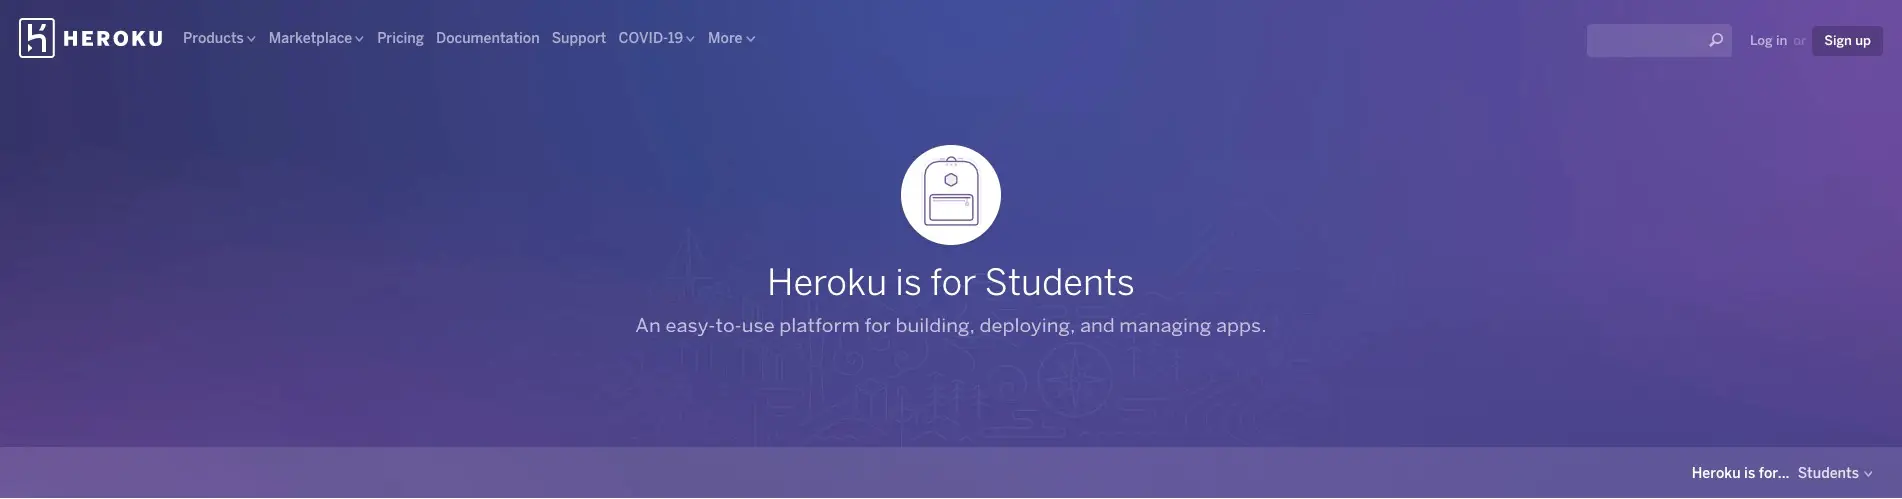 Heroku offers web hosting for students who are interested in building and deploying web applications